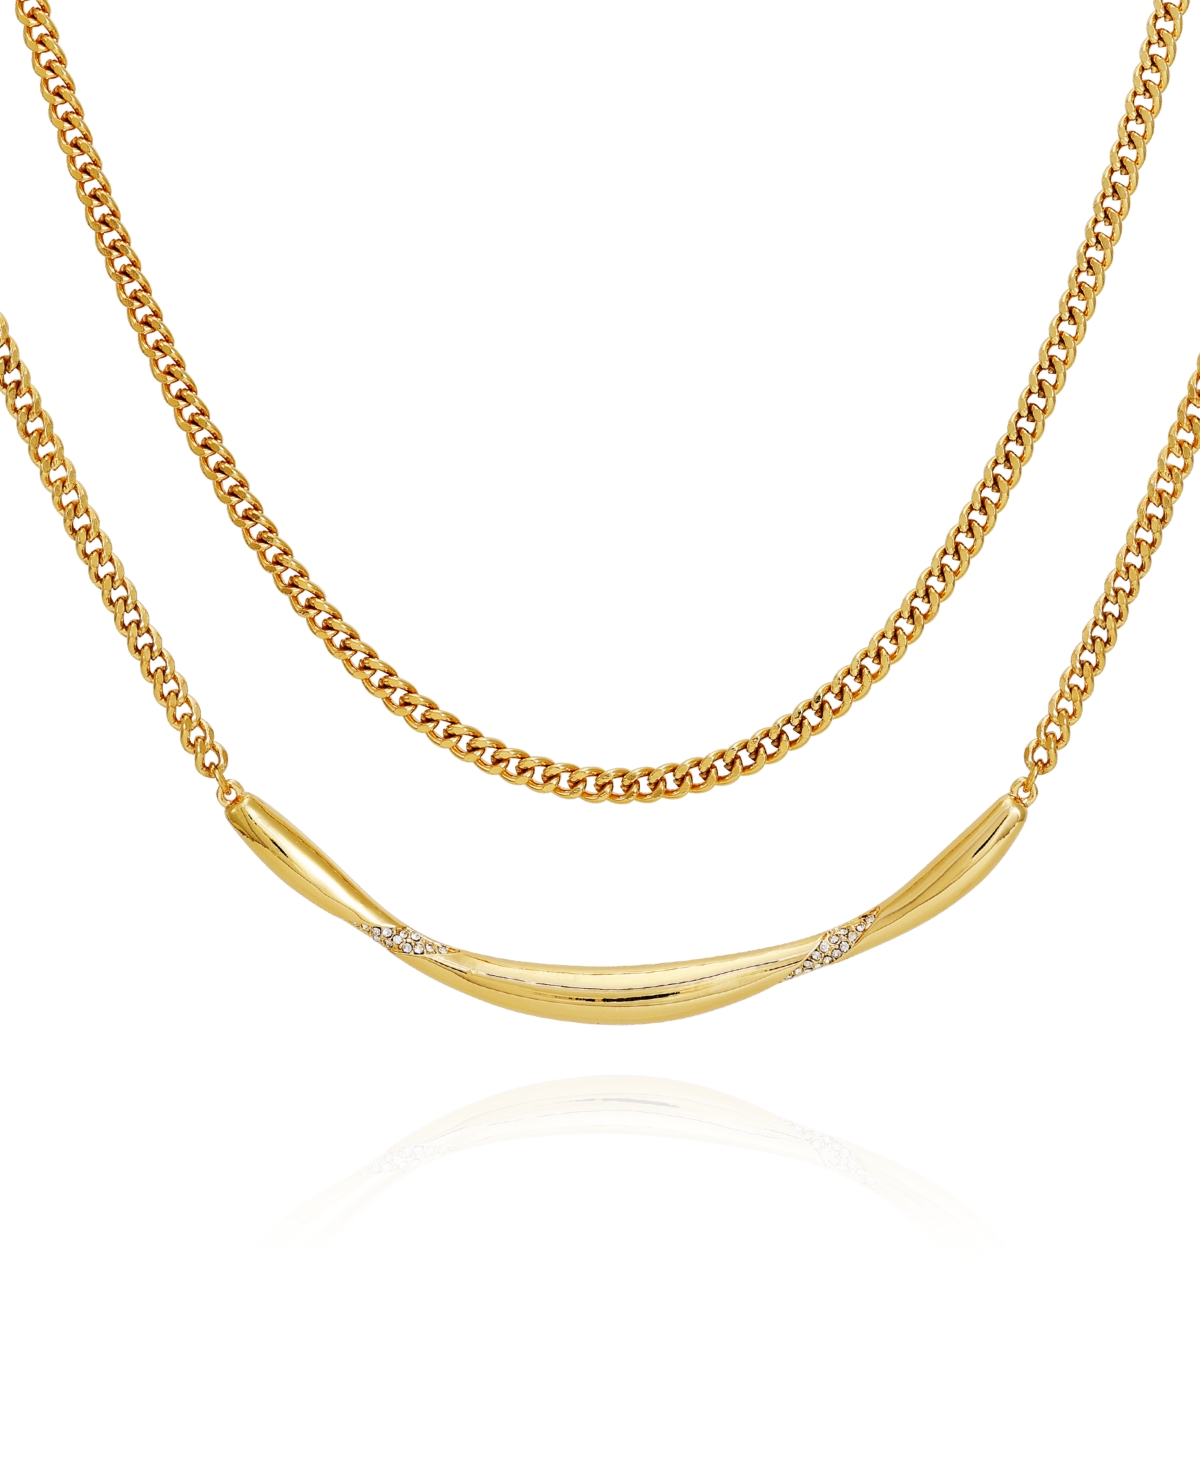 Vince Camuto Gold-tone Layered Curb Chain Necklace, 18" + 2" Extender